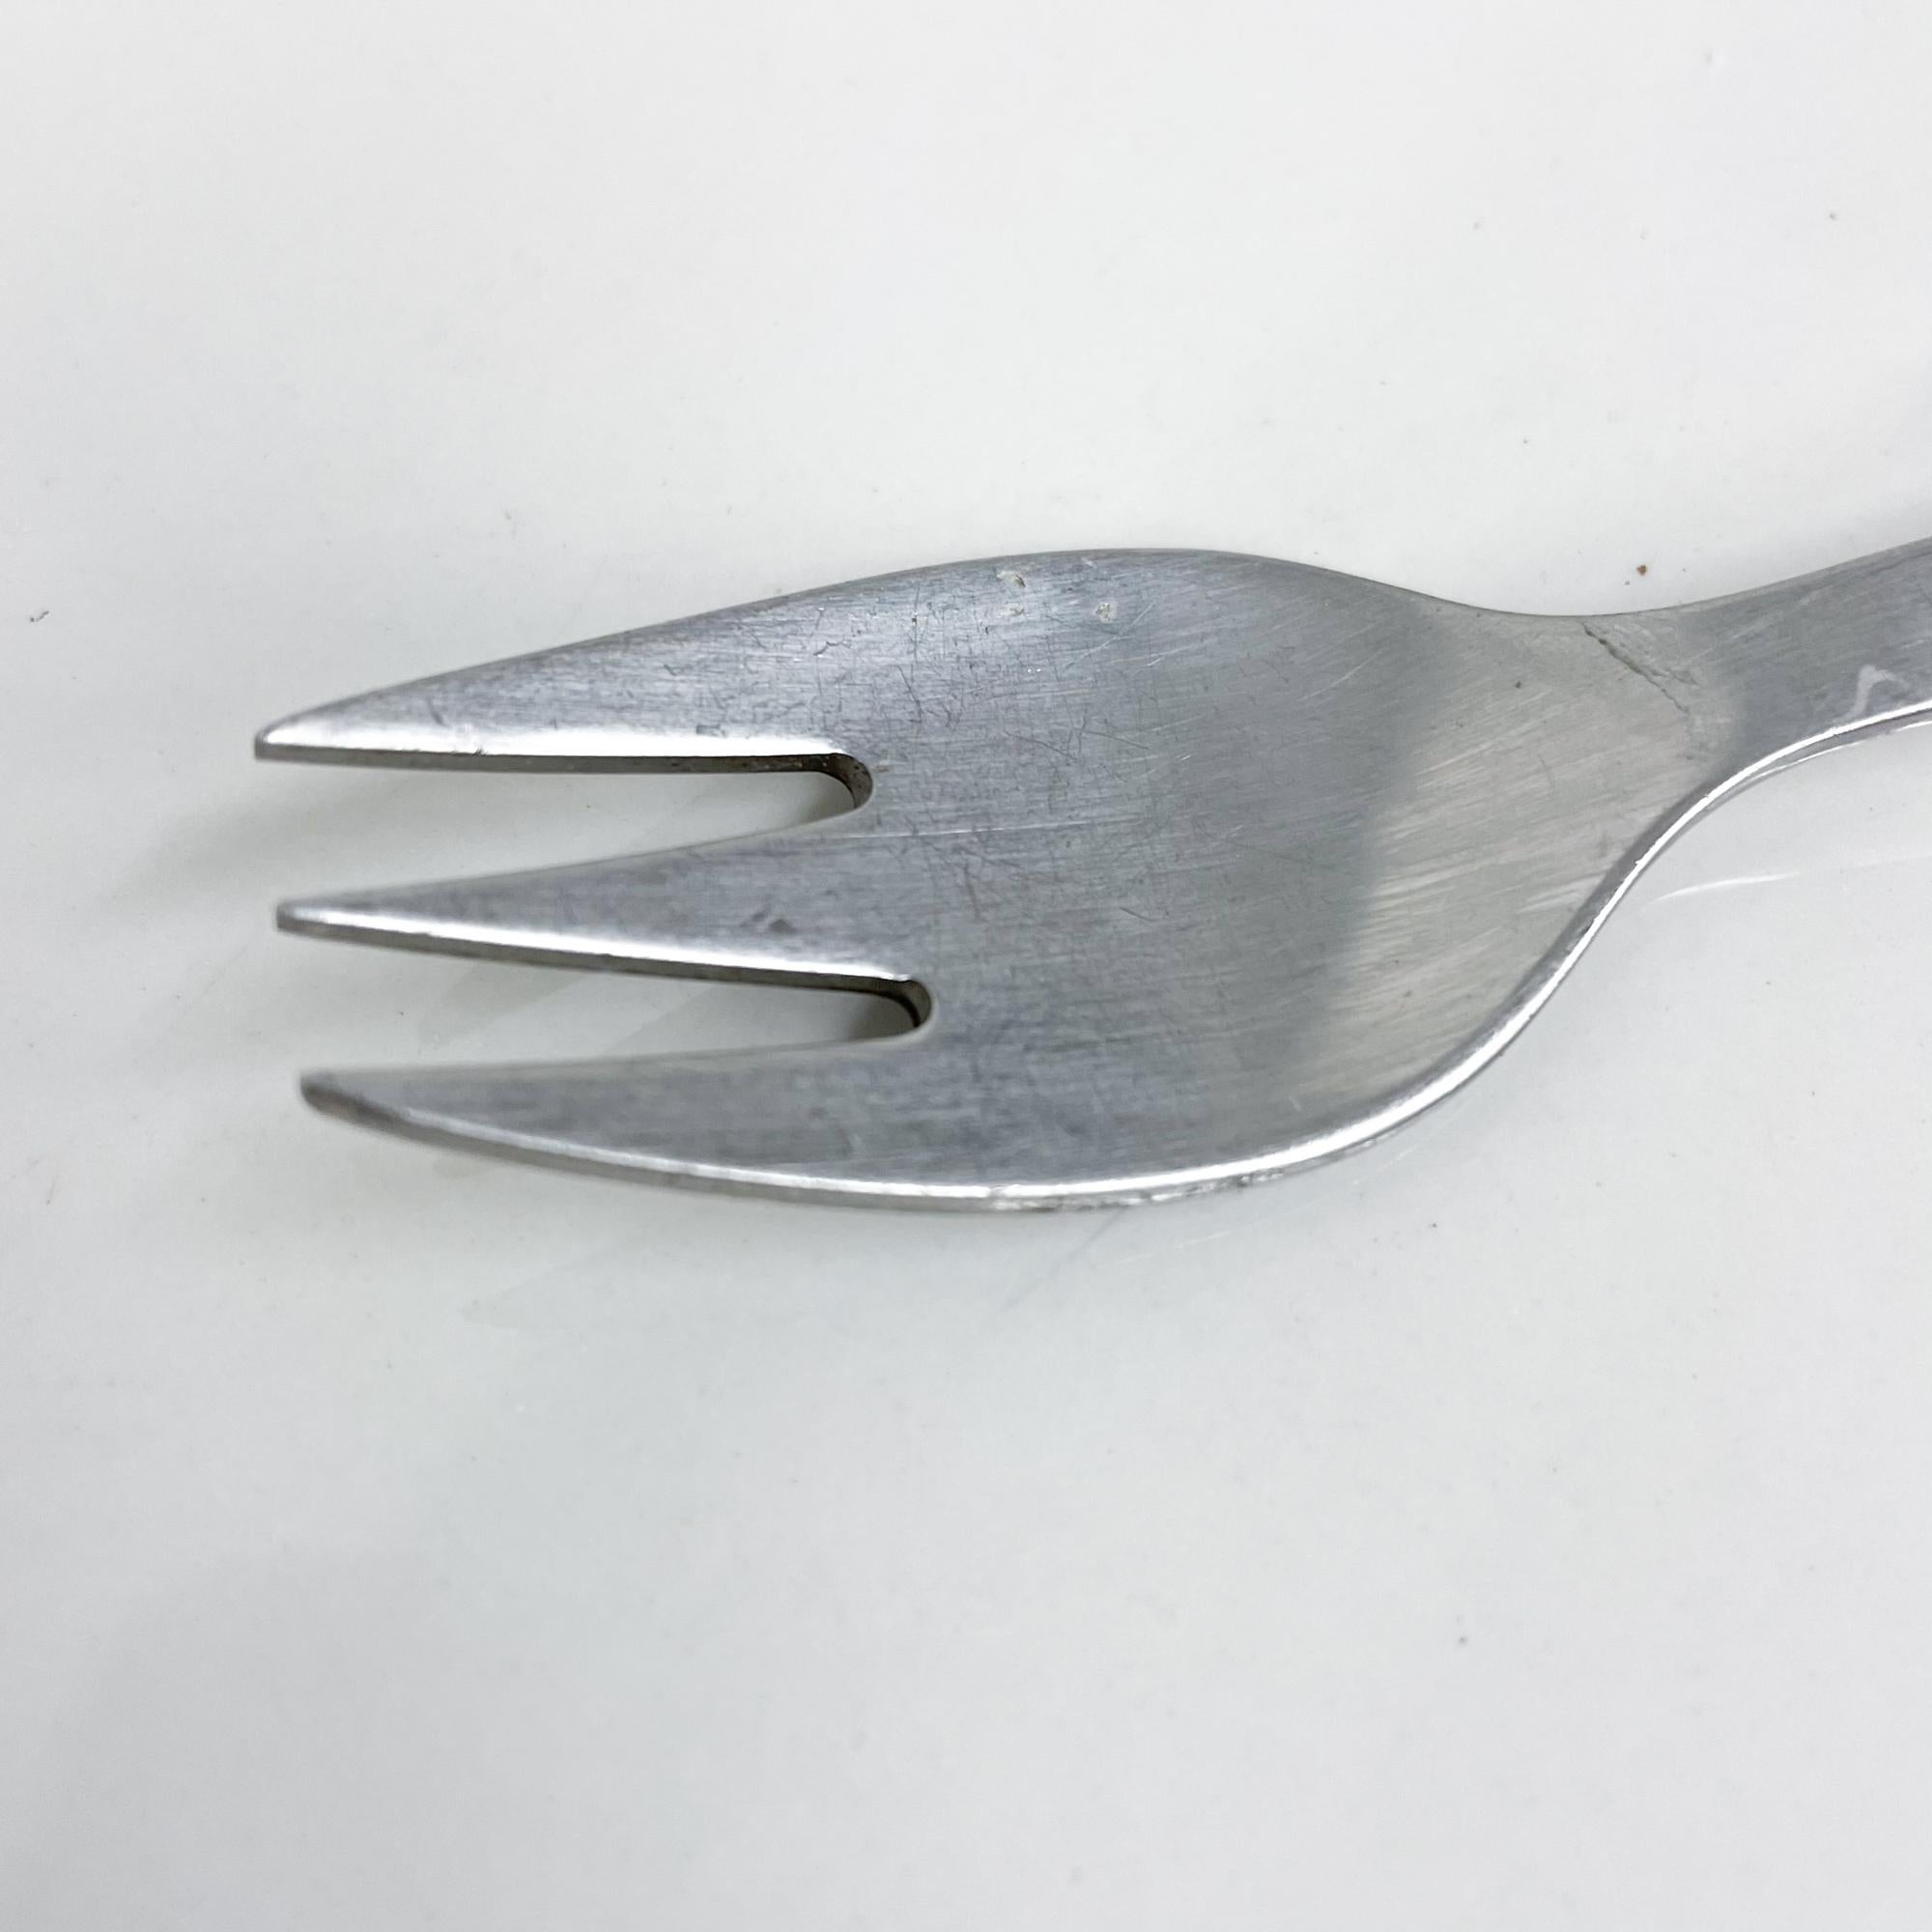 1970s Danish Henning Koppel designer for Georg Jensen Co Pattern is Strata- black flatware cutlery one small salad fork.
Clean modern lines. Stainless steel with black plastic handle
Made in Denmark, circa the 1970s.
Dimensions: 6.75